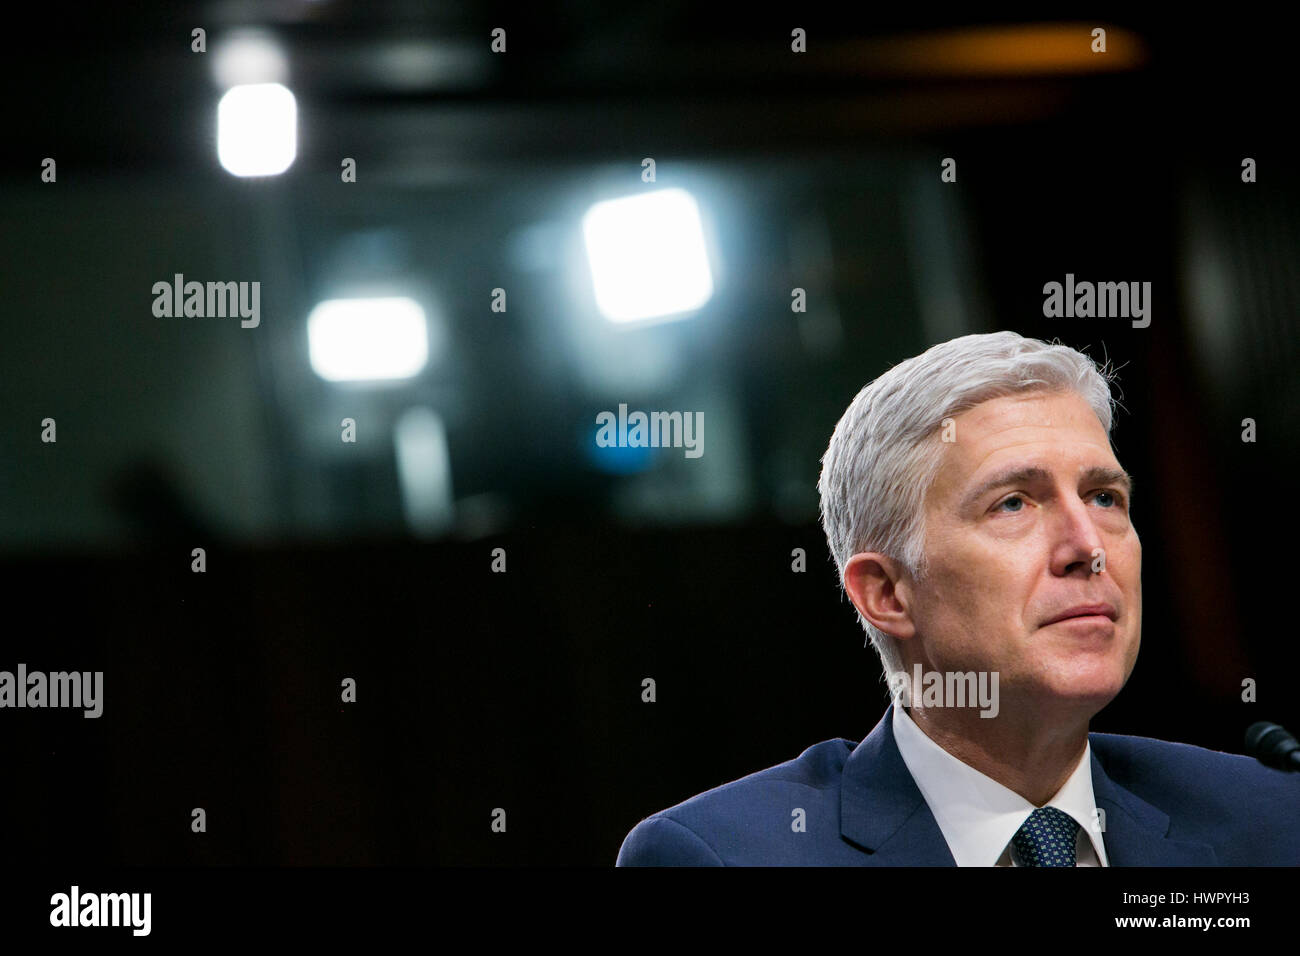 Washington, USA. 22nd Mar, 2017. Judge Neil Gorsuch testifies during his Supreme Court confirmation hearing before the Senate Judiciary Committee in Washington, D.C., on March 22, 2017. Gorsuch was nominated by President Donald Trump to fill the vacancy left on the court by the death of Justice Antonin Scalia. Credit: Kristoffer Tripplaar/Alamy Live News Stock Photo